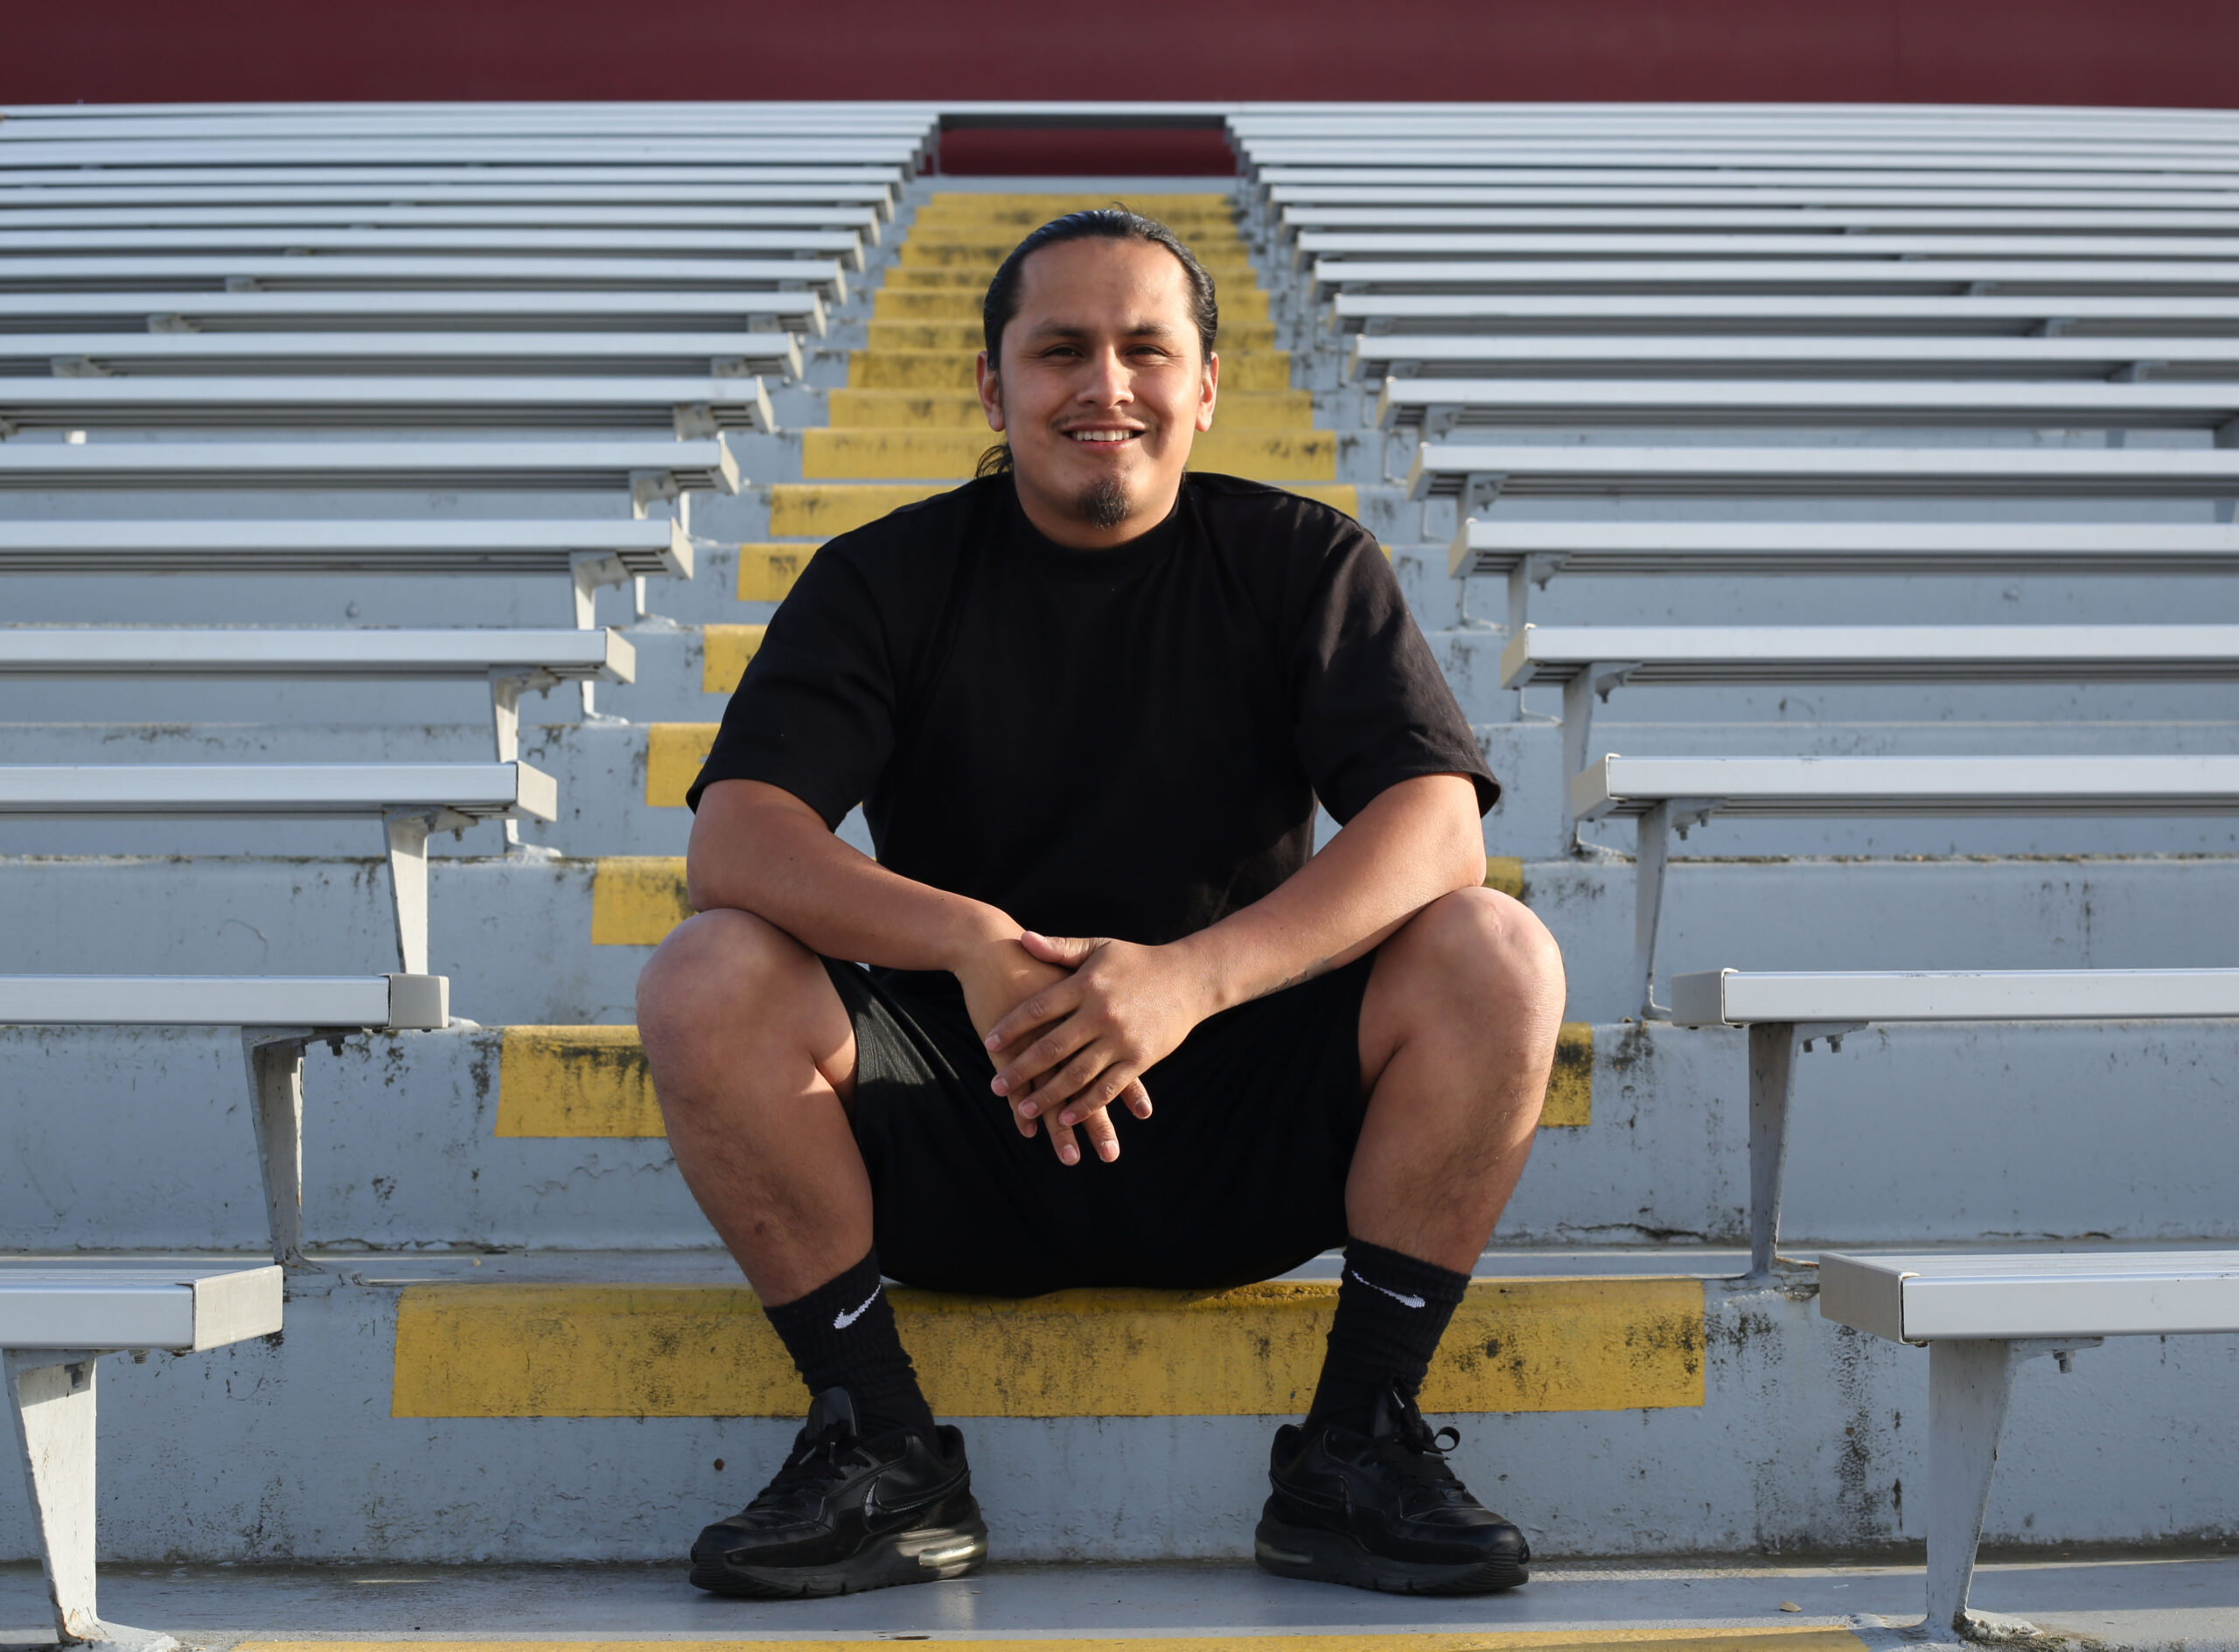 Luis sits on one of many rows of stairs behind him, wearing a black shirt, shorts, socks, and shoes as he smiles on a sunny evening.